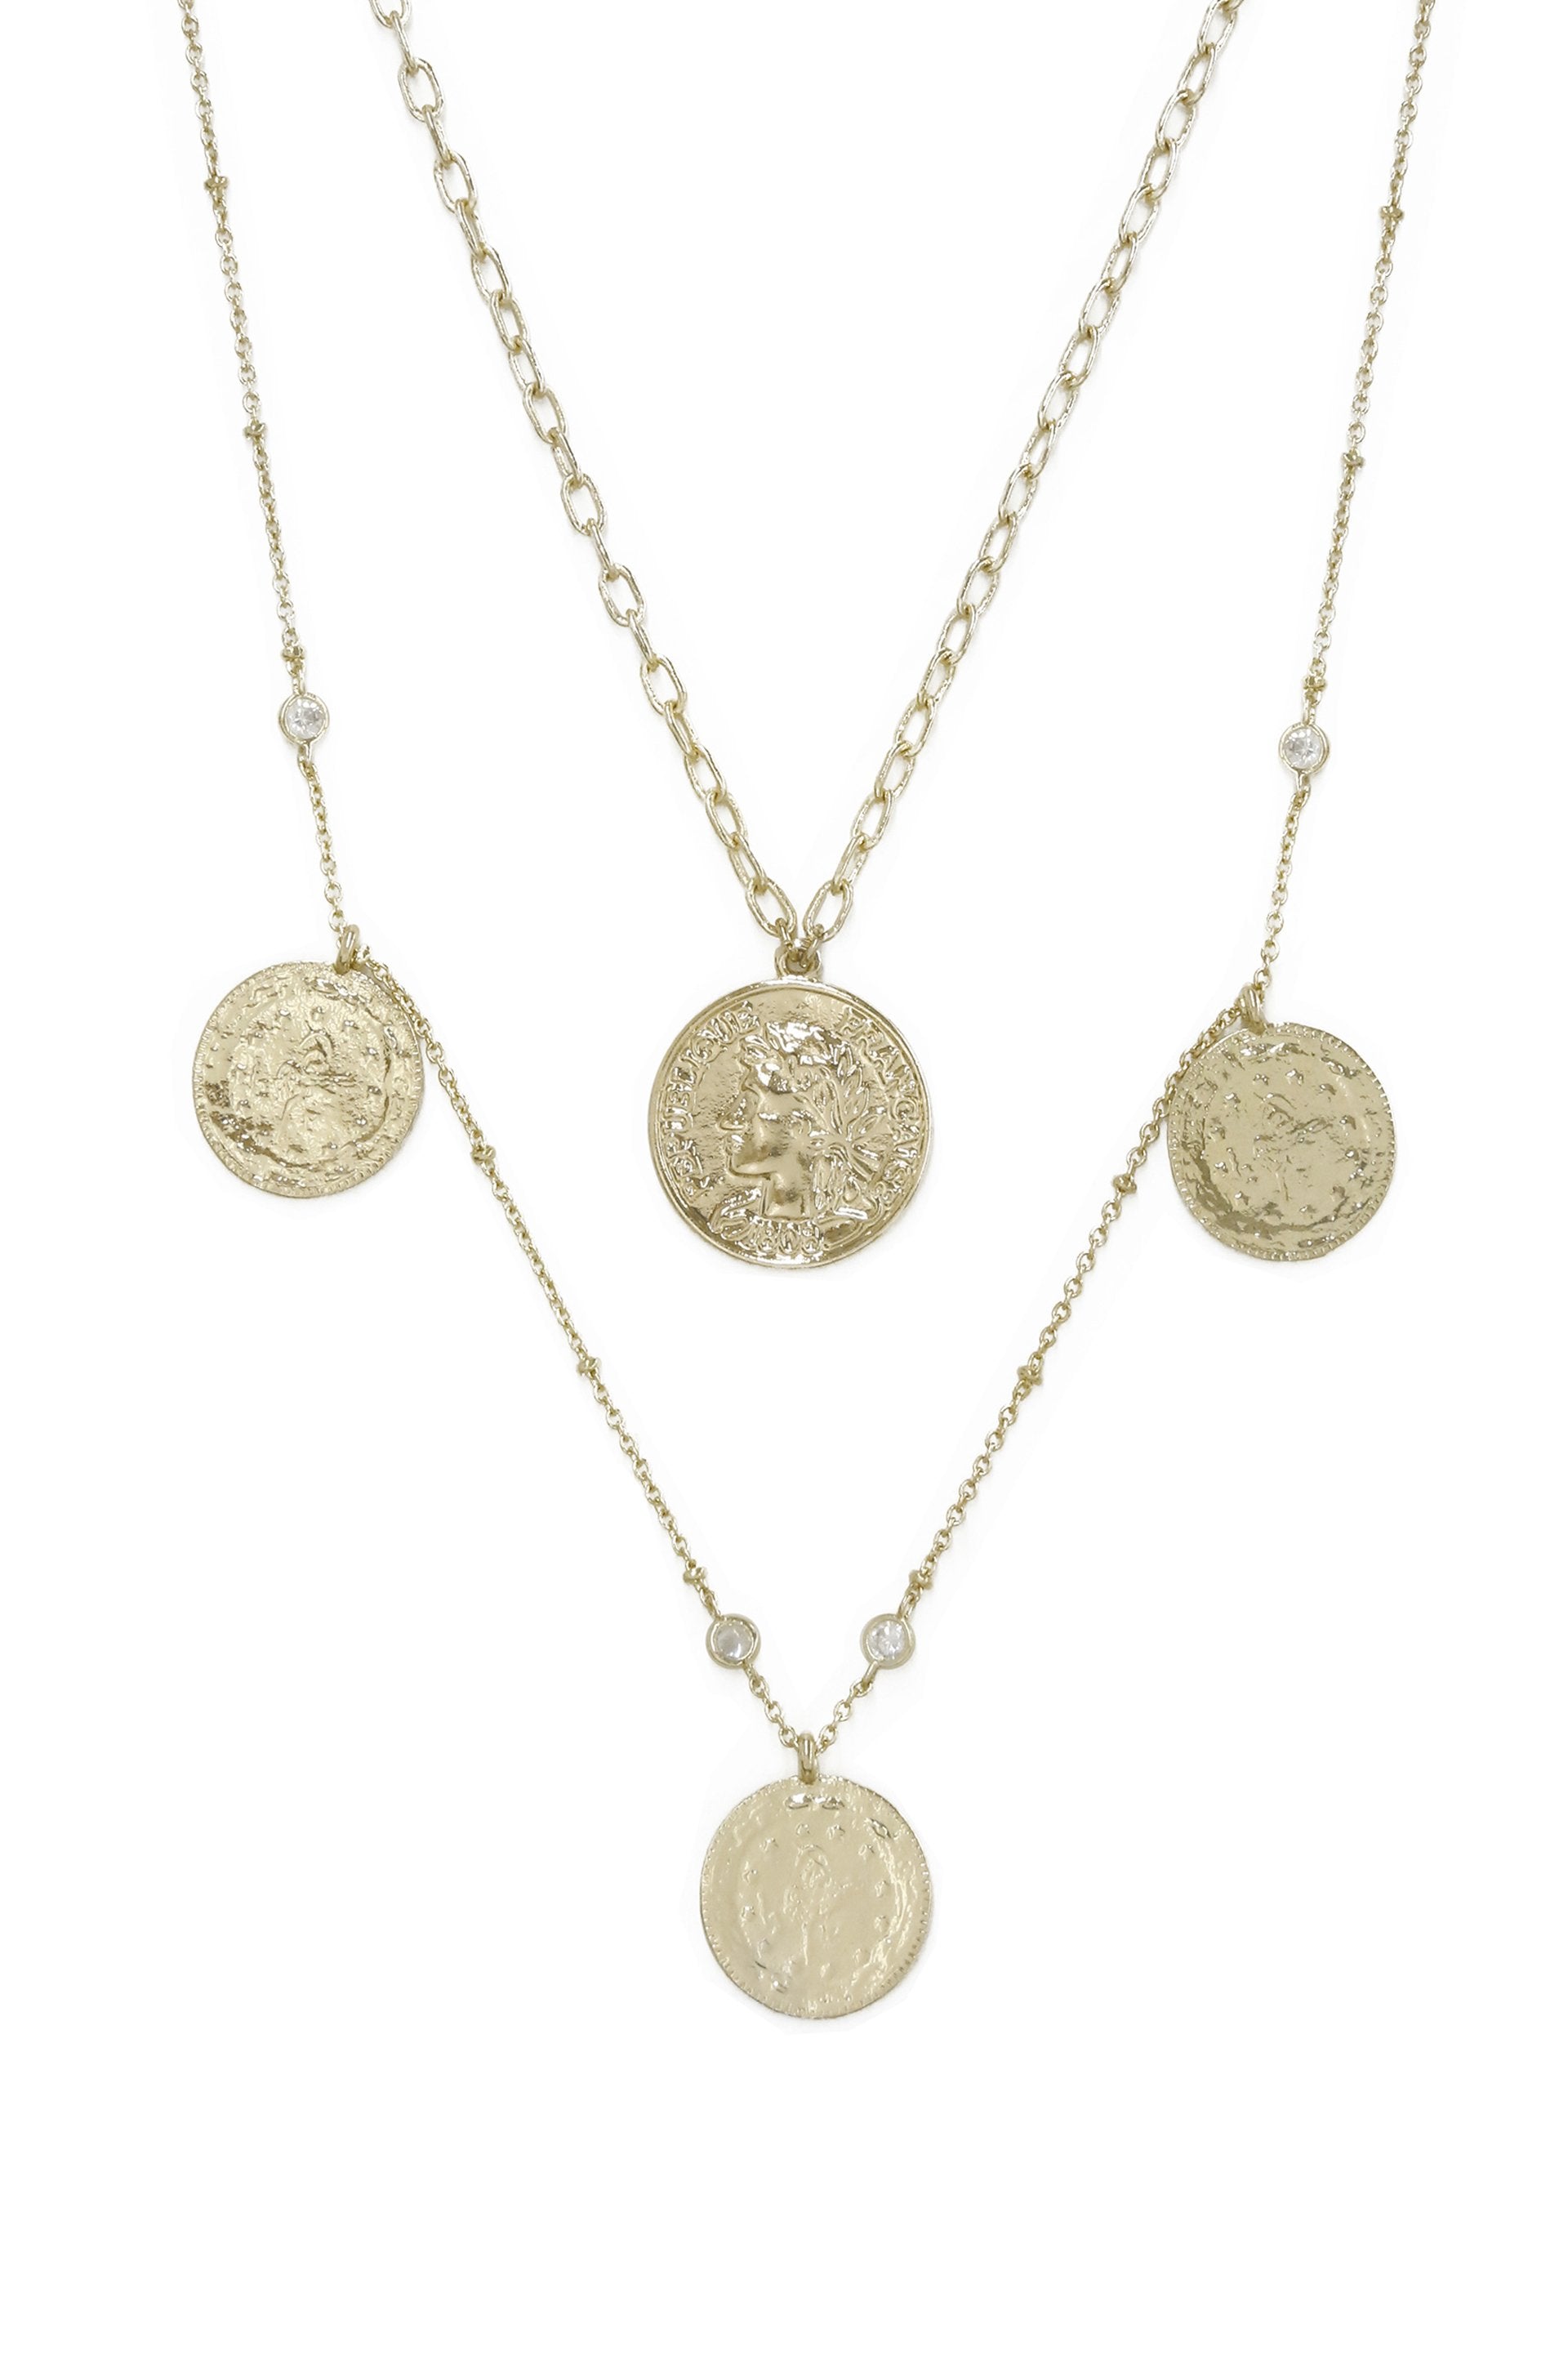 GUESS Gold-Tone 3-Pc. Set Multi-Crystal Layering Necklaces